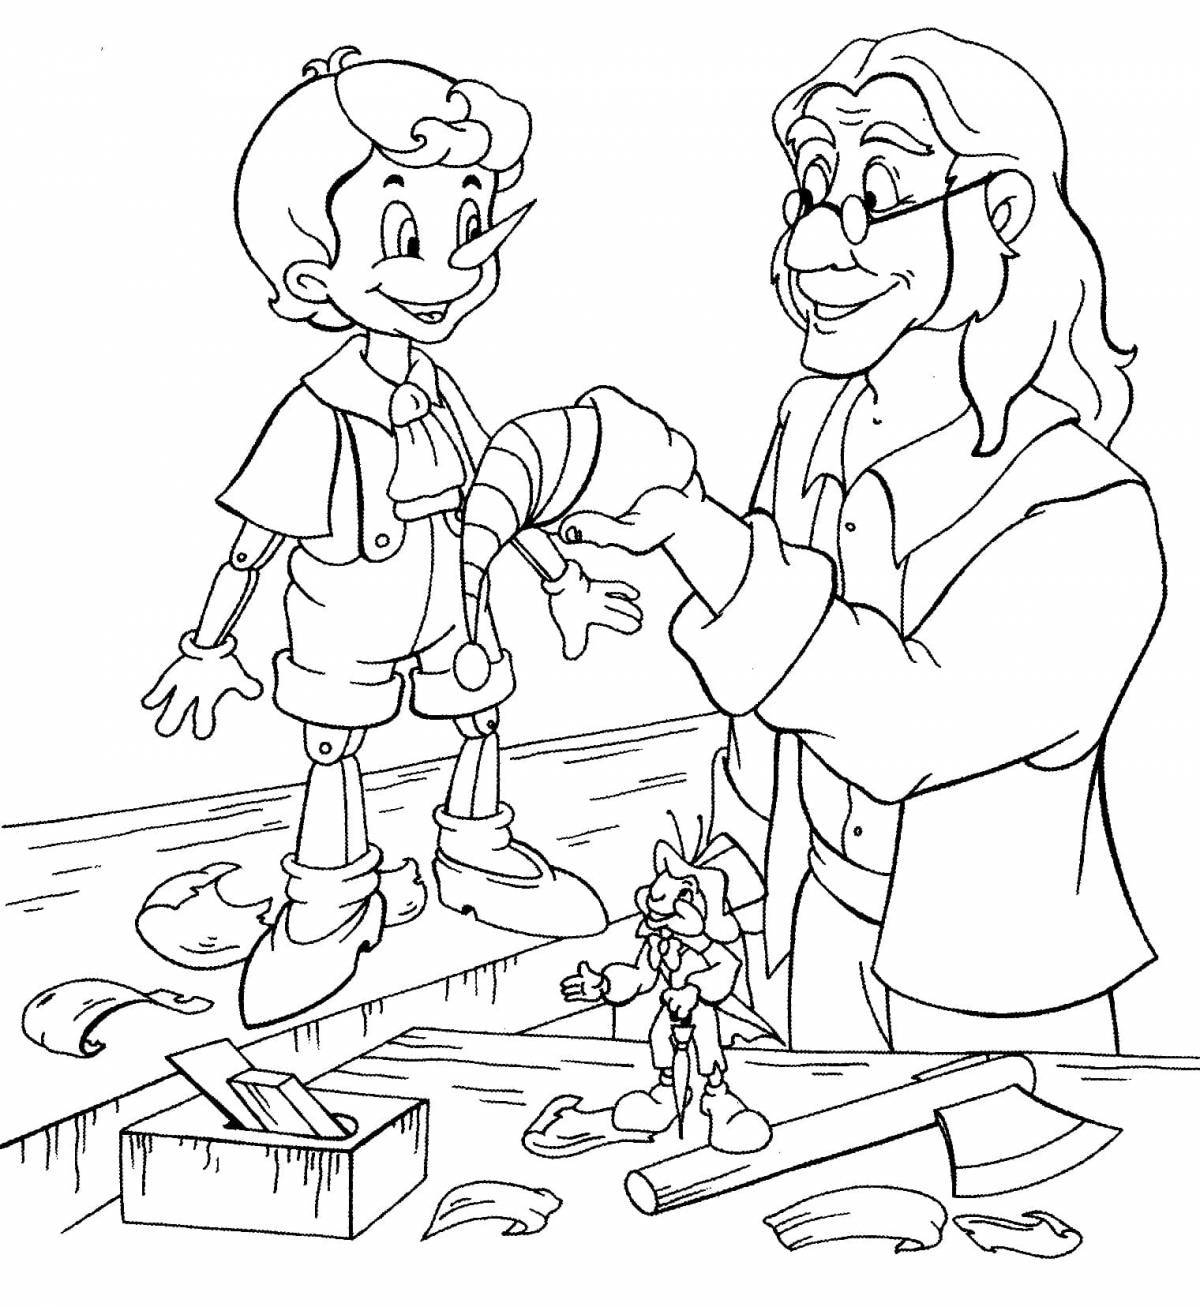 Joyful pinocchio coloring pages for kids